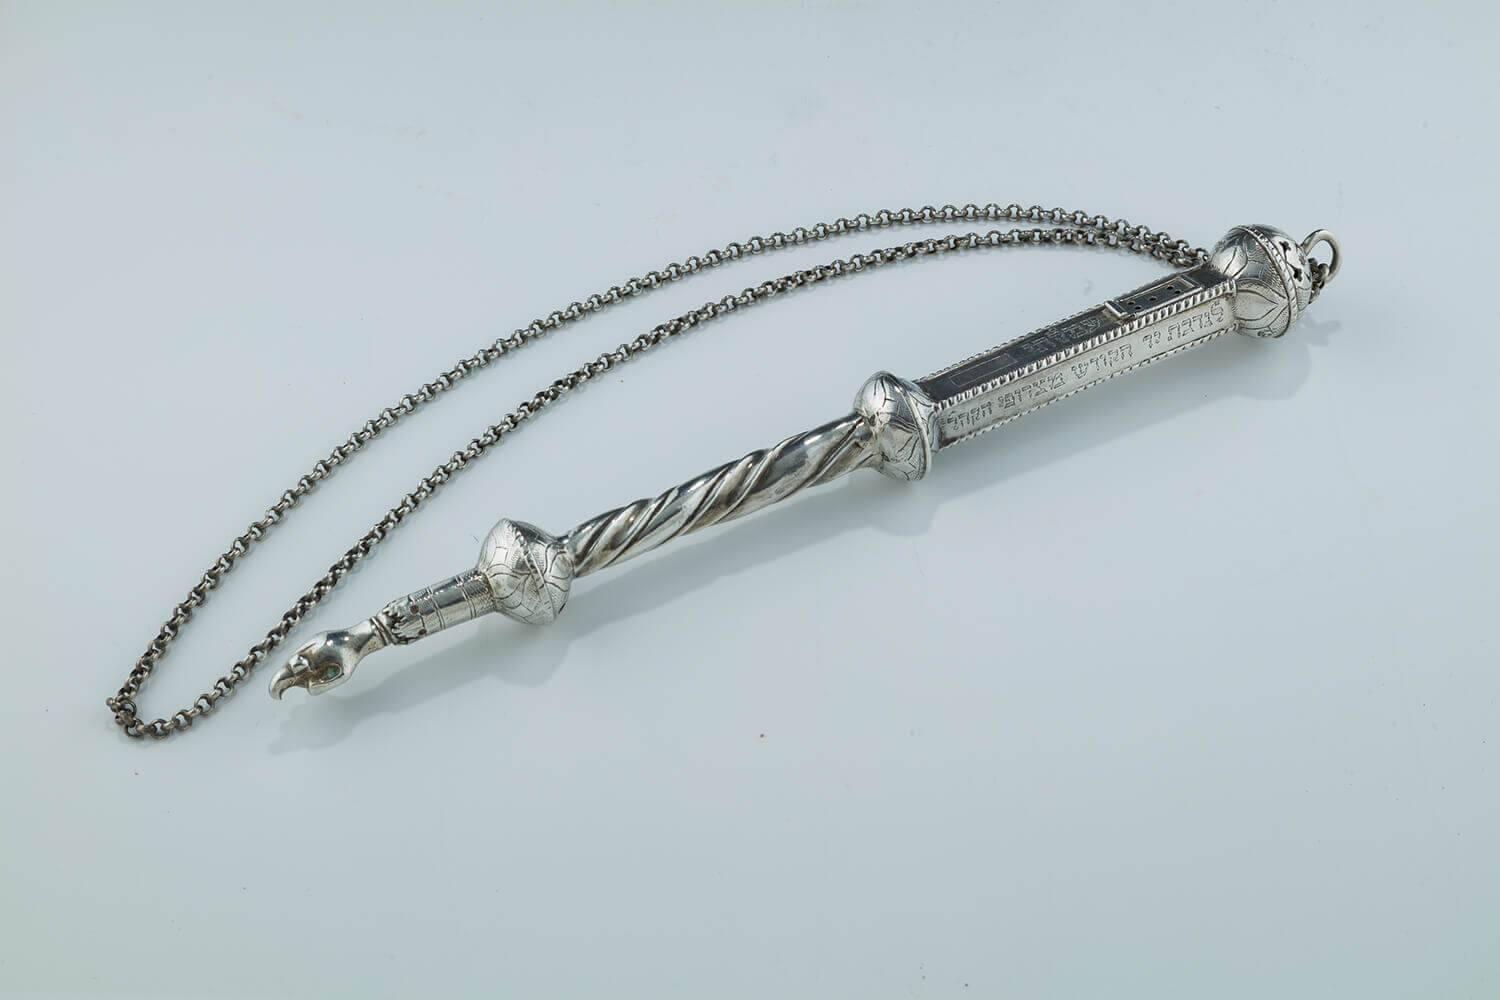 078. A RARE AND IMPORTANT SILVER TORAH POINTER